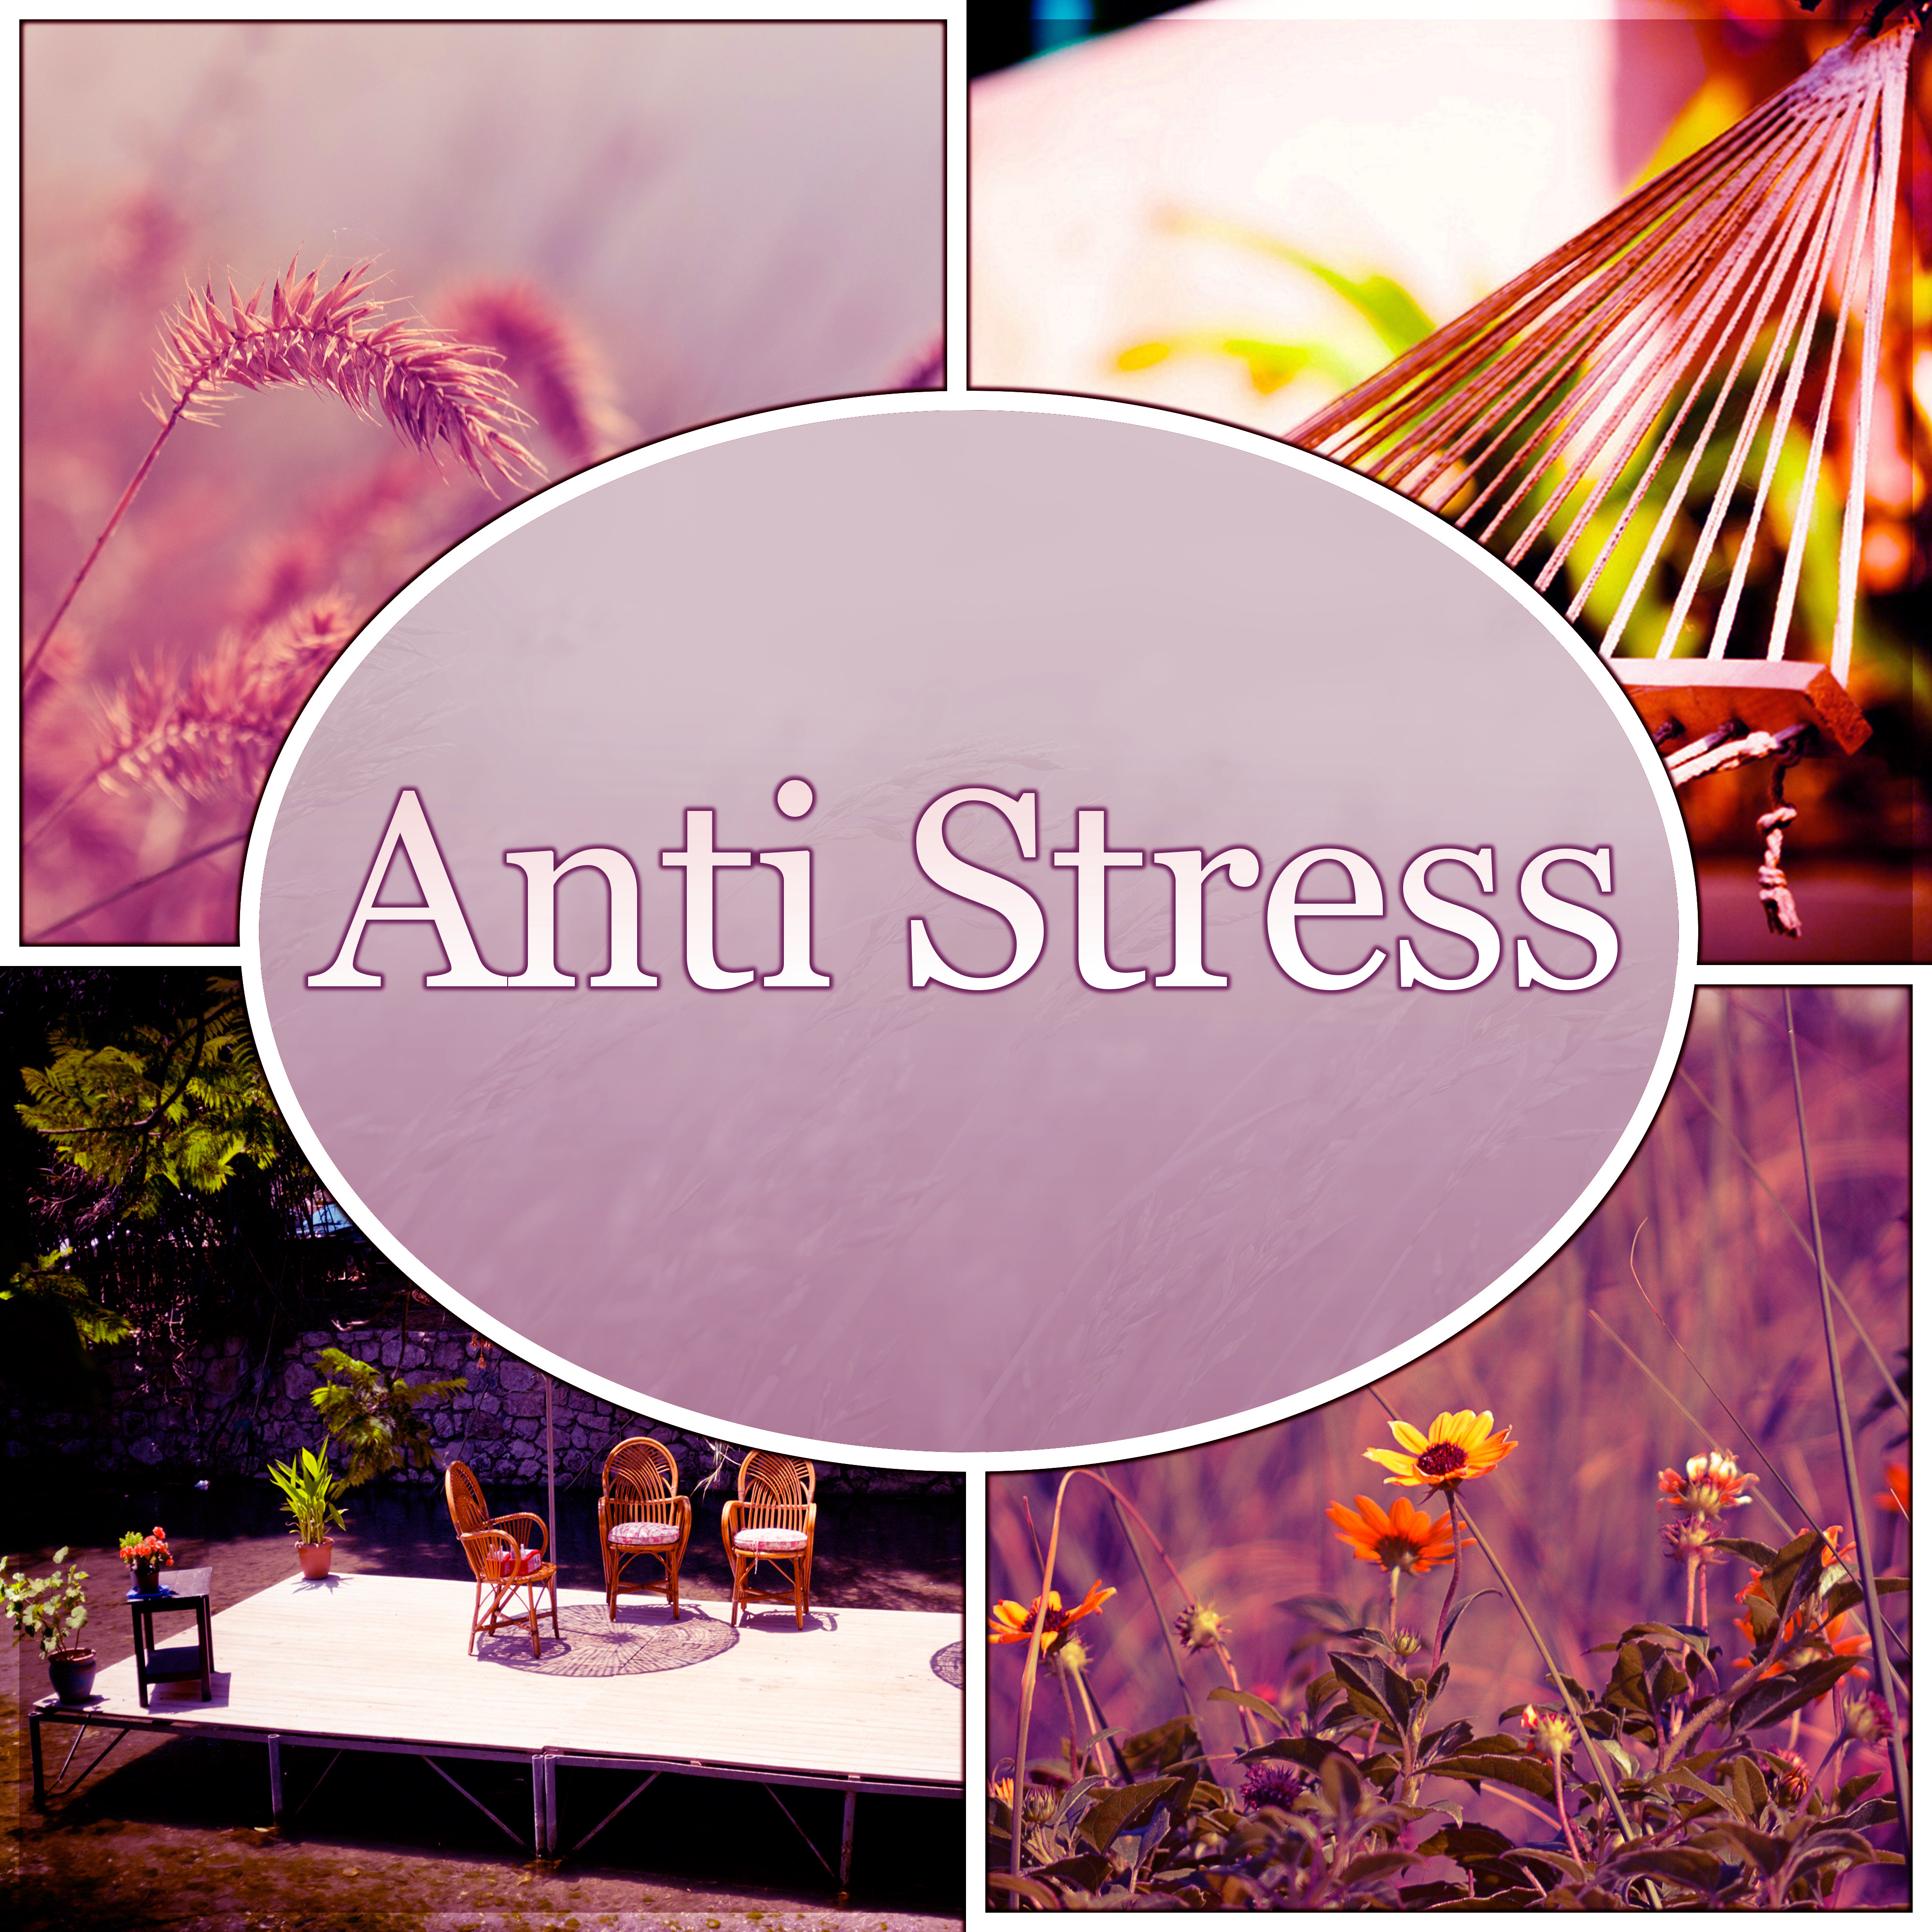 Anti Stress  Relaxing Songs for Mindfulness Meditation  Yoga Exercises, Guided Imagery Music, Asian Zen Spa and Massage, Natural White Noise, Sounds of Nature